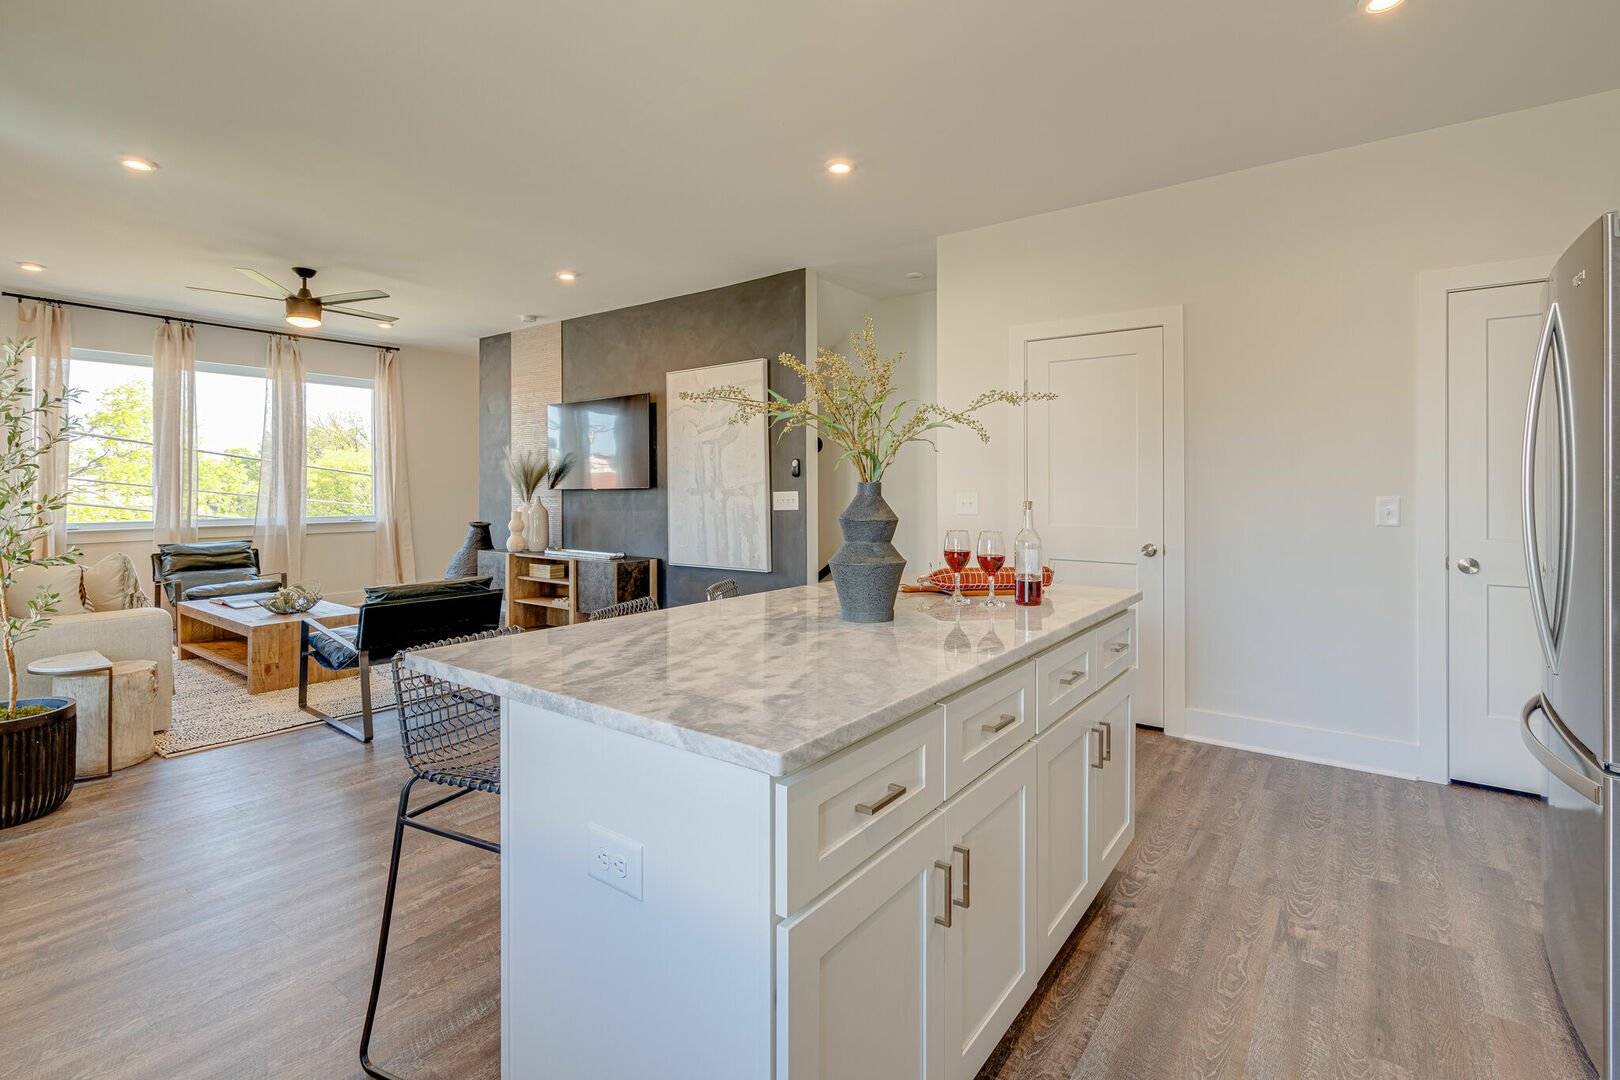 Fully equipped kitchen stocked with basic cooking essentials and stainless steel appliances overlooking the designer-furnished living room. (2nd Floor) -Unit 3-